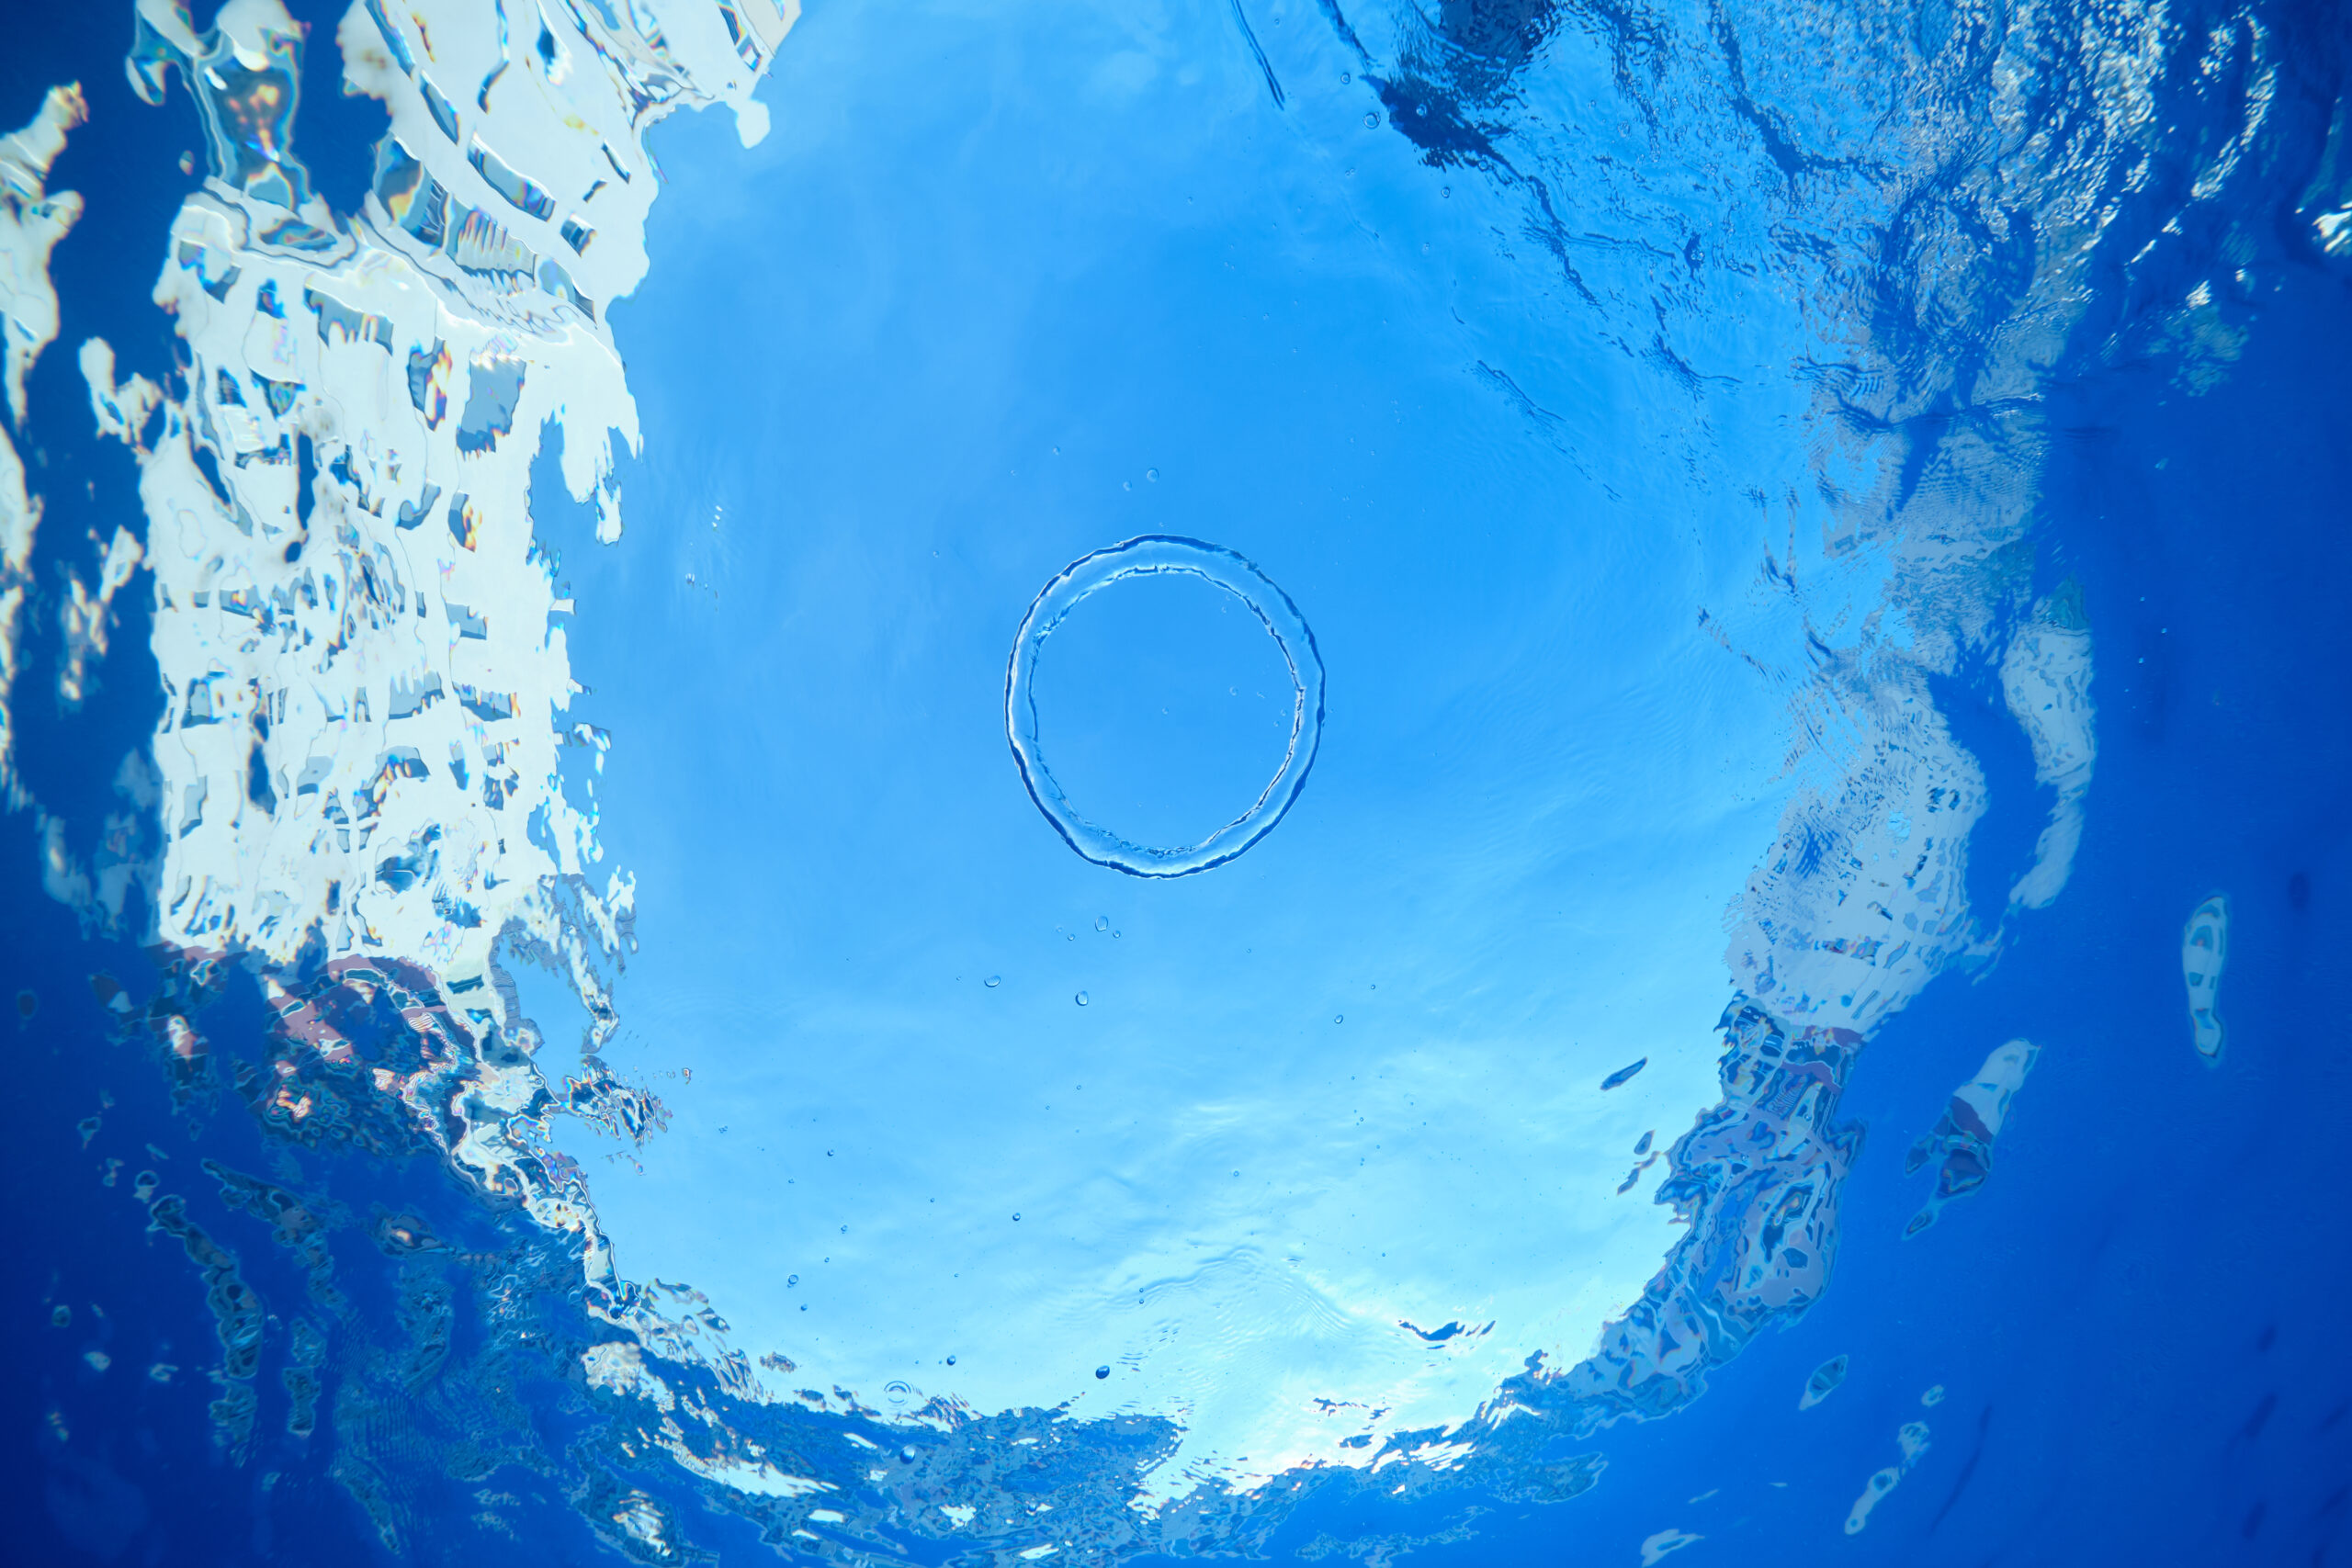 blue clear water with air ring 2022 01 28 10 42 49 utc scaled What Are Carbon Sinks? How Do They Impact Climate Change?